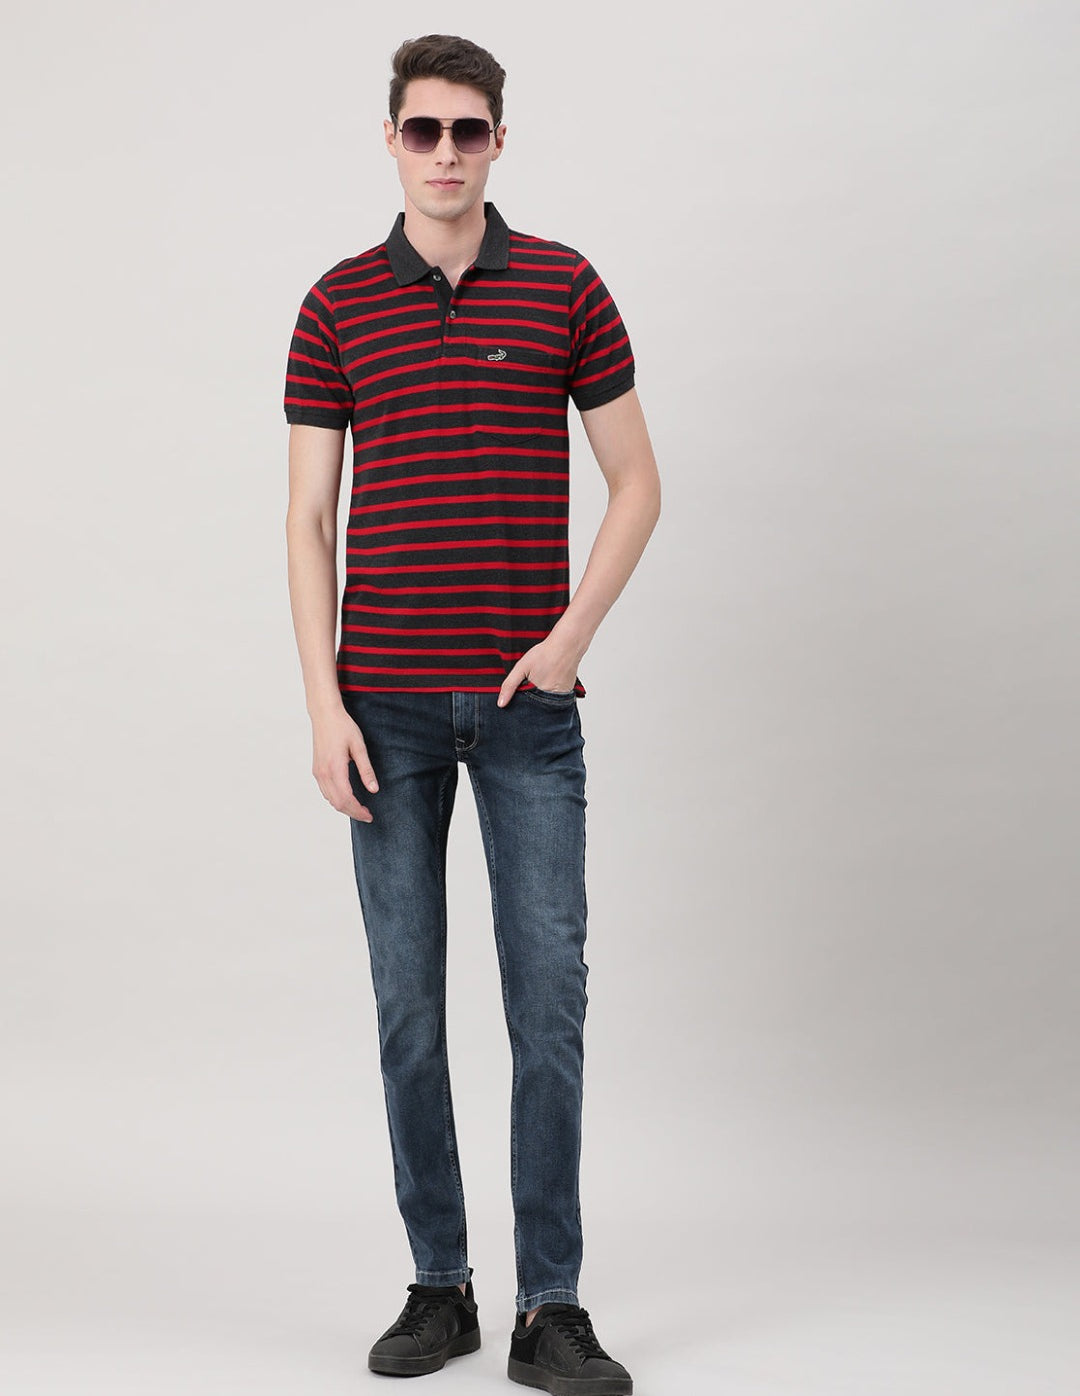 Crocodile Casual Red T-Shirt Striper Half Sleeve Slim Fit with Collar